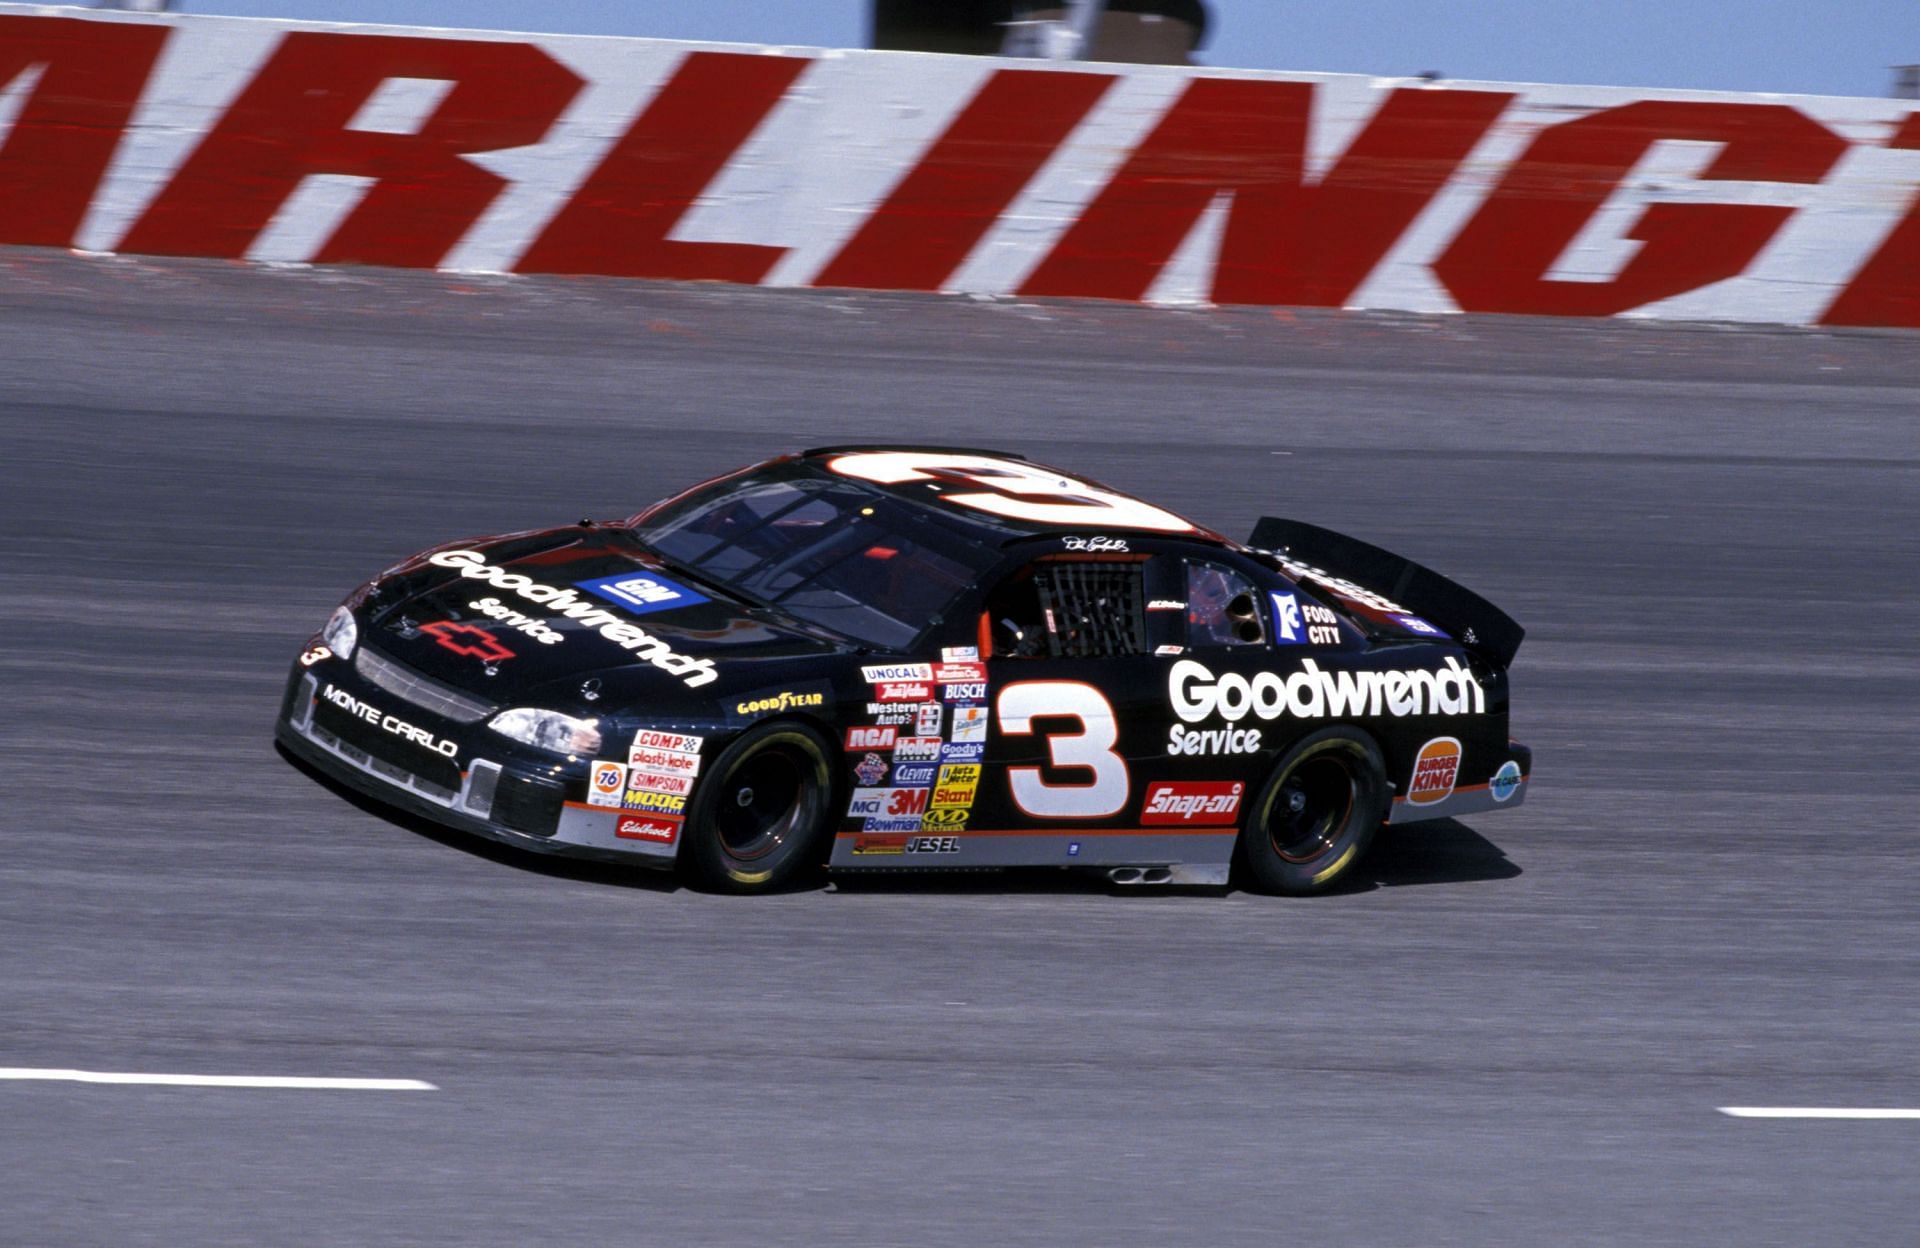 Dale Earnhardt drives his #3 Goodwrench Chevrolet Monte Carlo at Darlington Speedway during the 2001 NASCAR Winston Cup